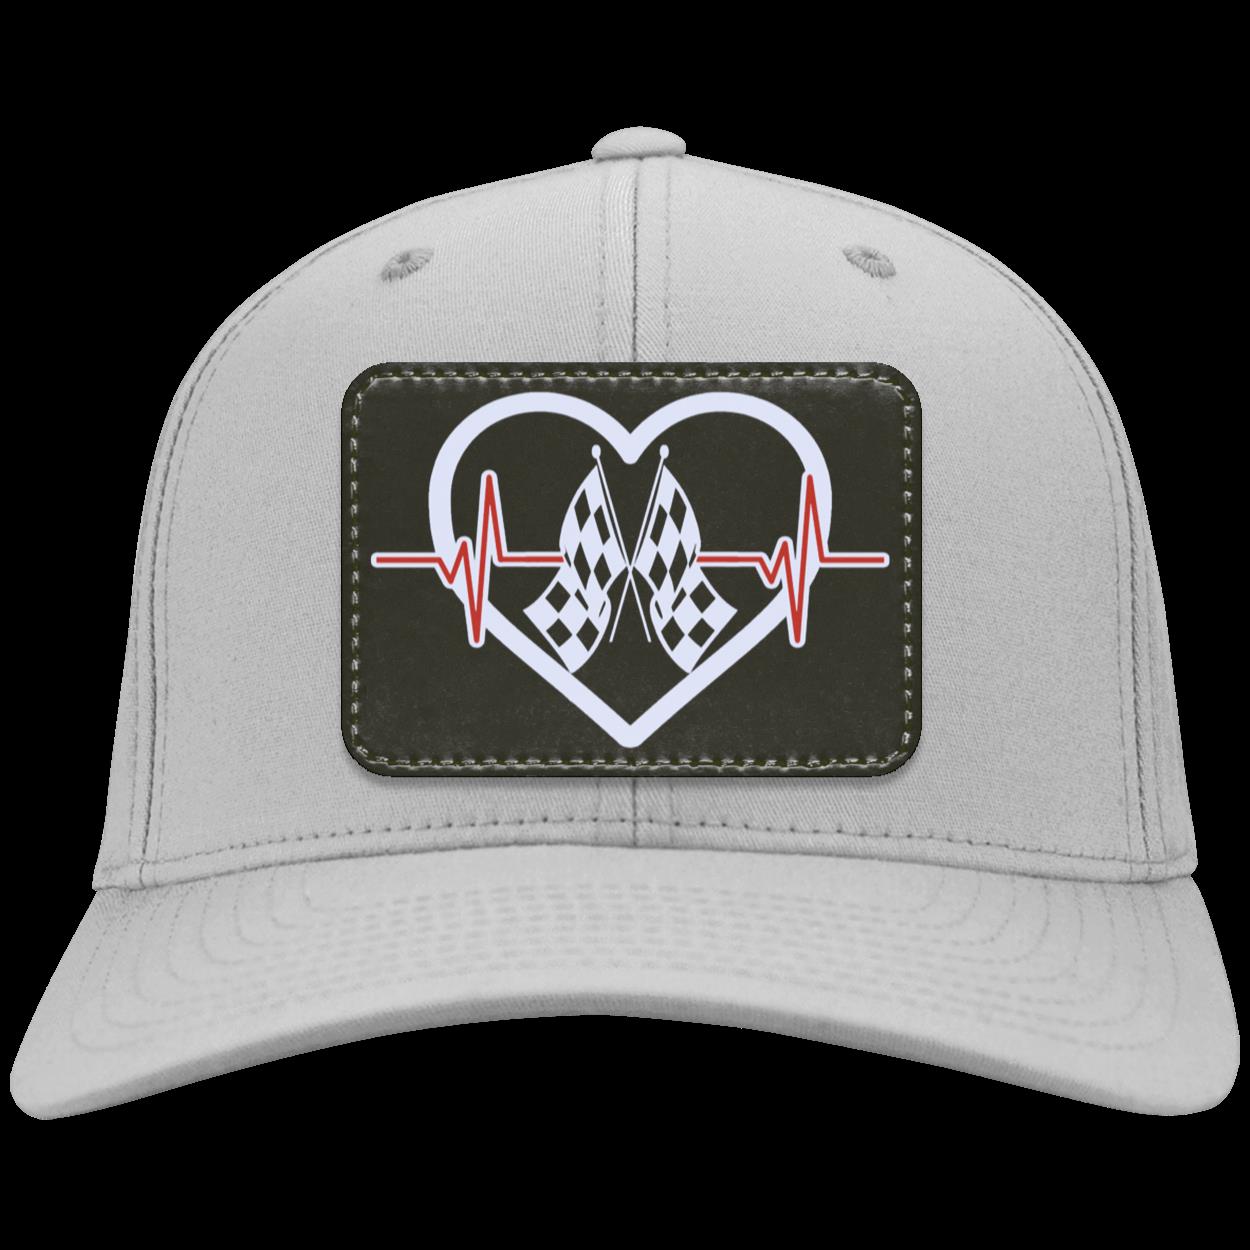 Racing Heartbeat Patched Twill Cap